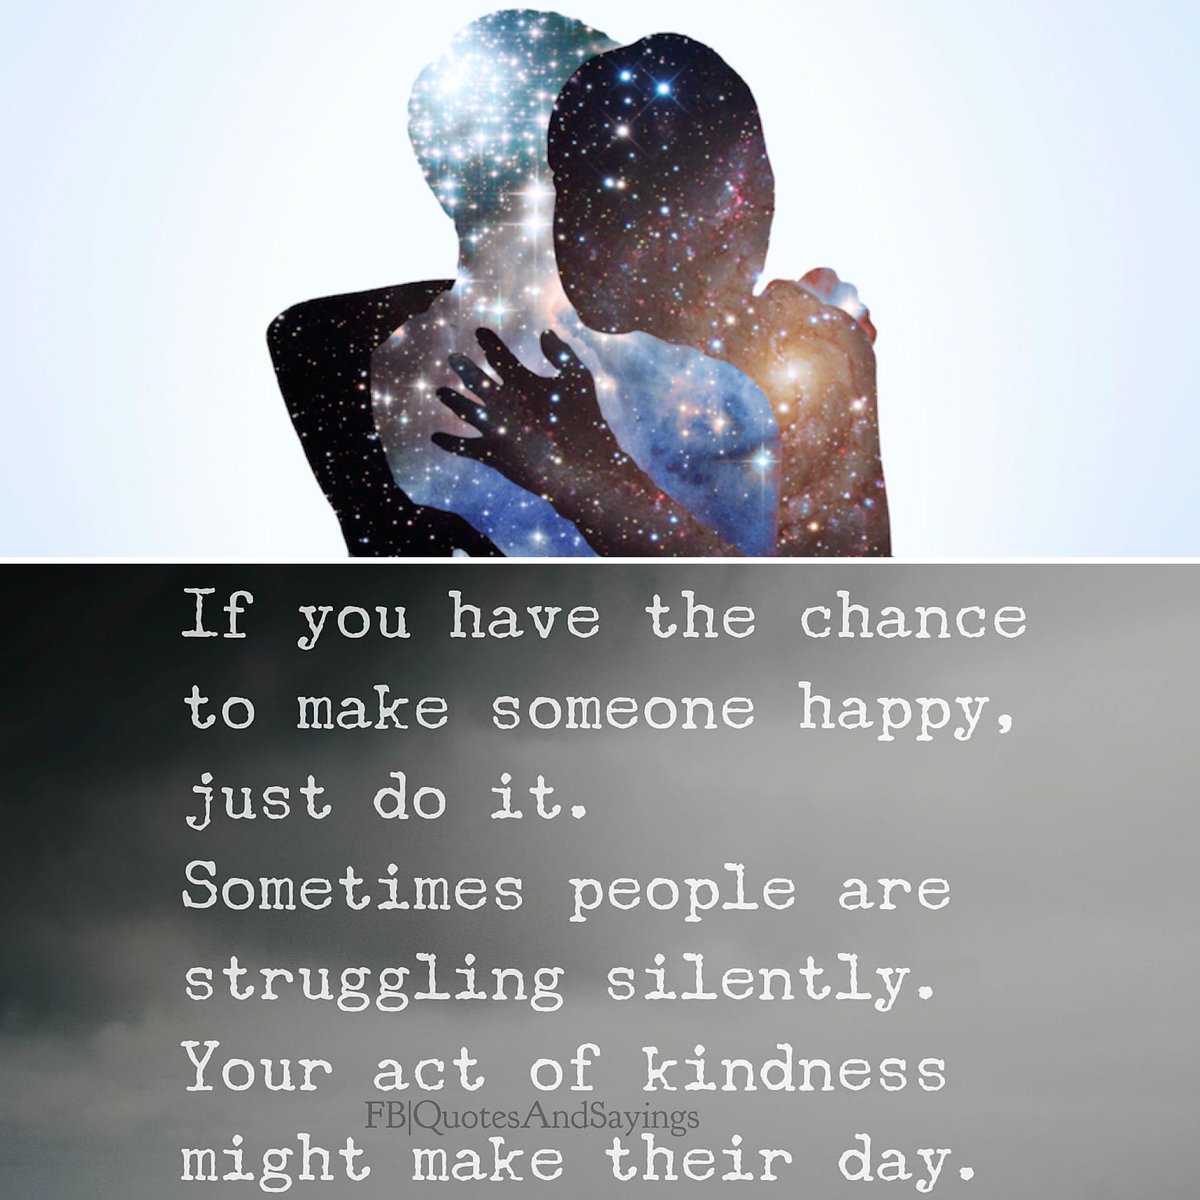 If you have the chance to comfort another or make someone happy … just do it. We all carry baggage. Sometimes people are struggling silently on their journey throughout our lives. Your act of kindness might make a difference … It can be a game changer! 🫶👇